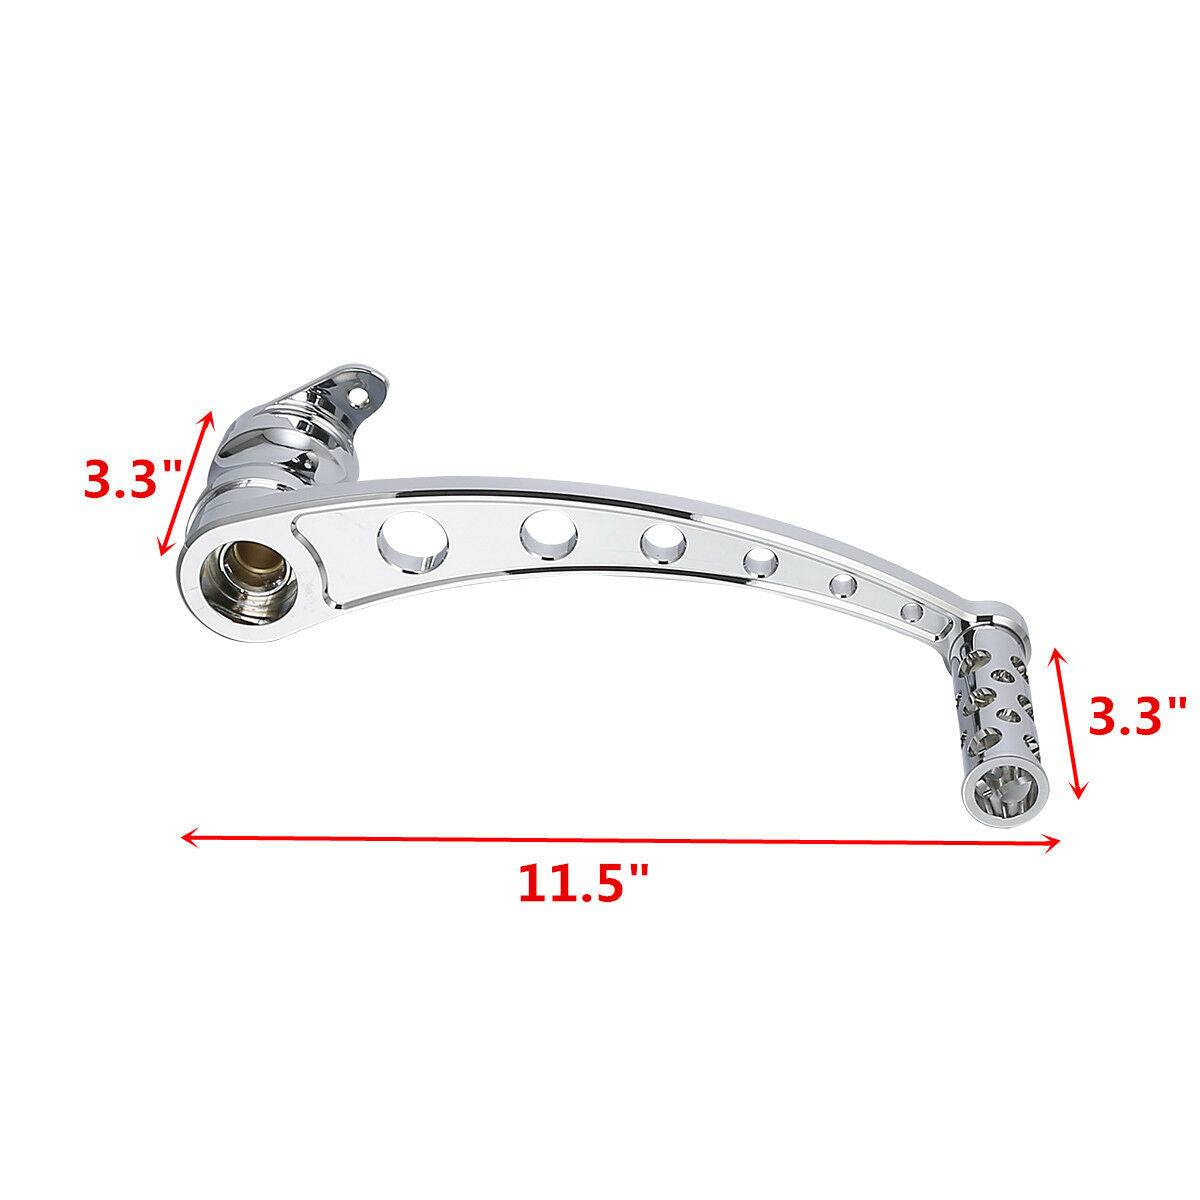 Shift Lever Shifter Peg Brake Arm Fit For Harley Touring 97-07 Softail 87-17 New - Moto Life Products